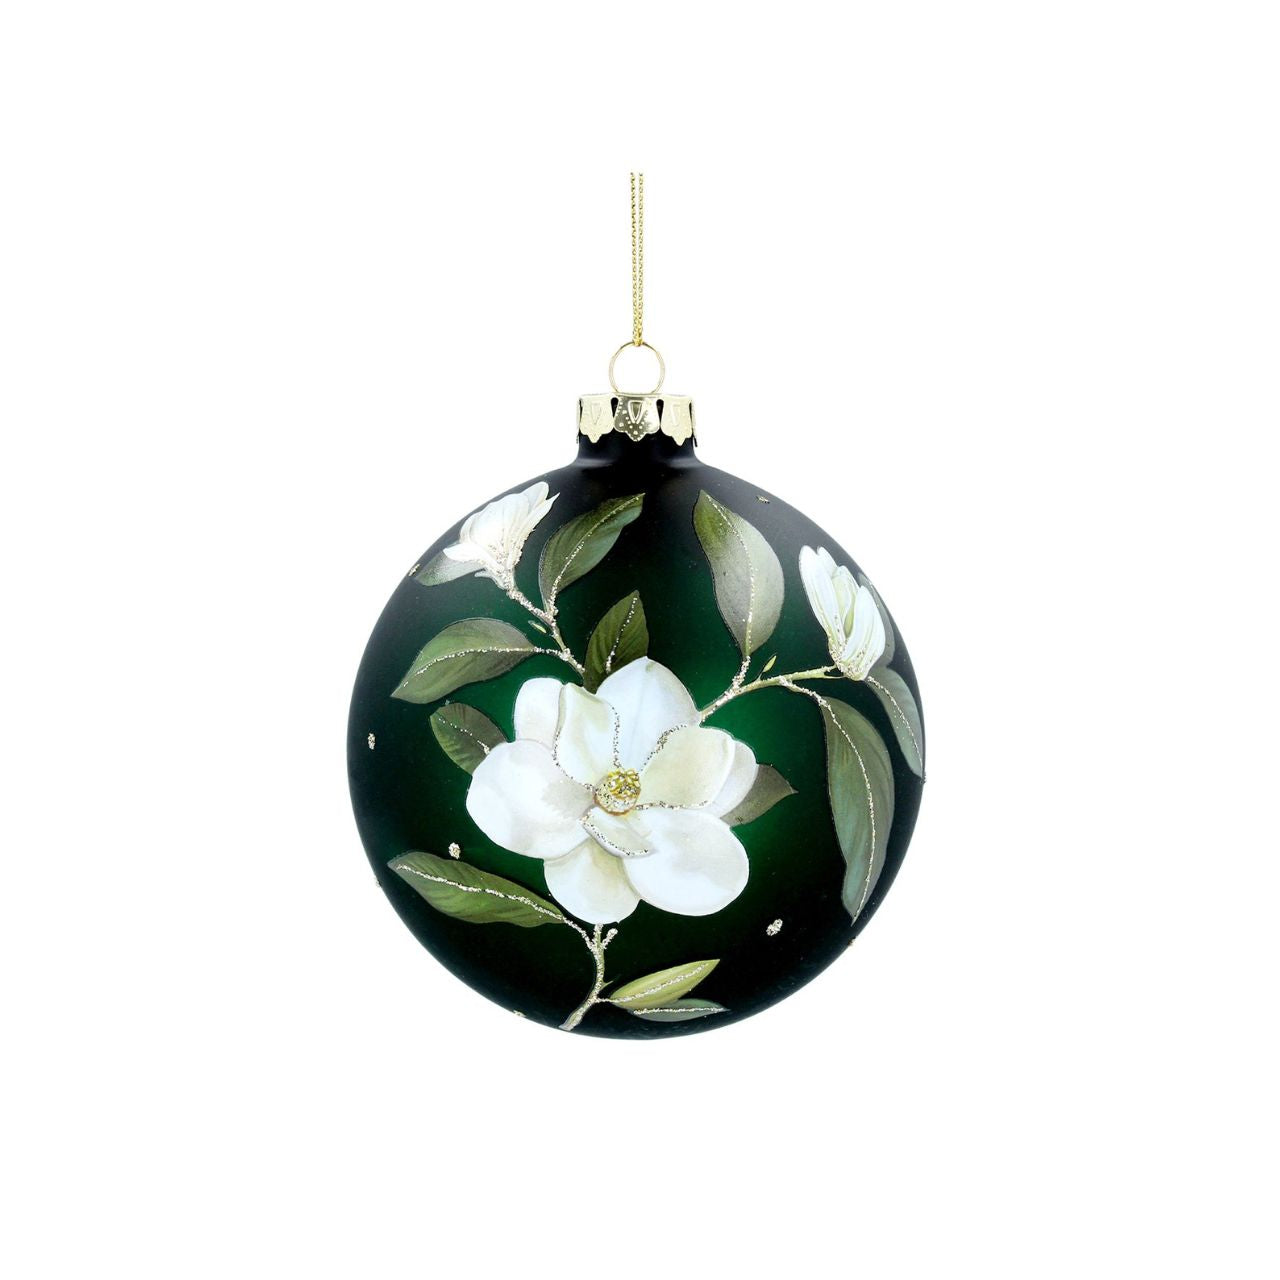 Gisela Graham Green Glass Magnolia Christmas Bauble  This stunning Gisela Graham Green Glass Magnolia Christmas Bauble adds a festive touch to any holiday décor. Decorated with intricate Magnolia details, it is the perfect addition to any Christmas tree.